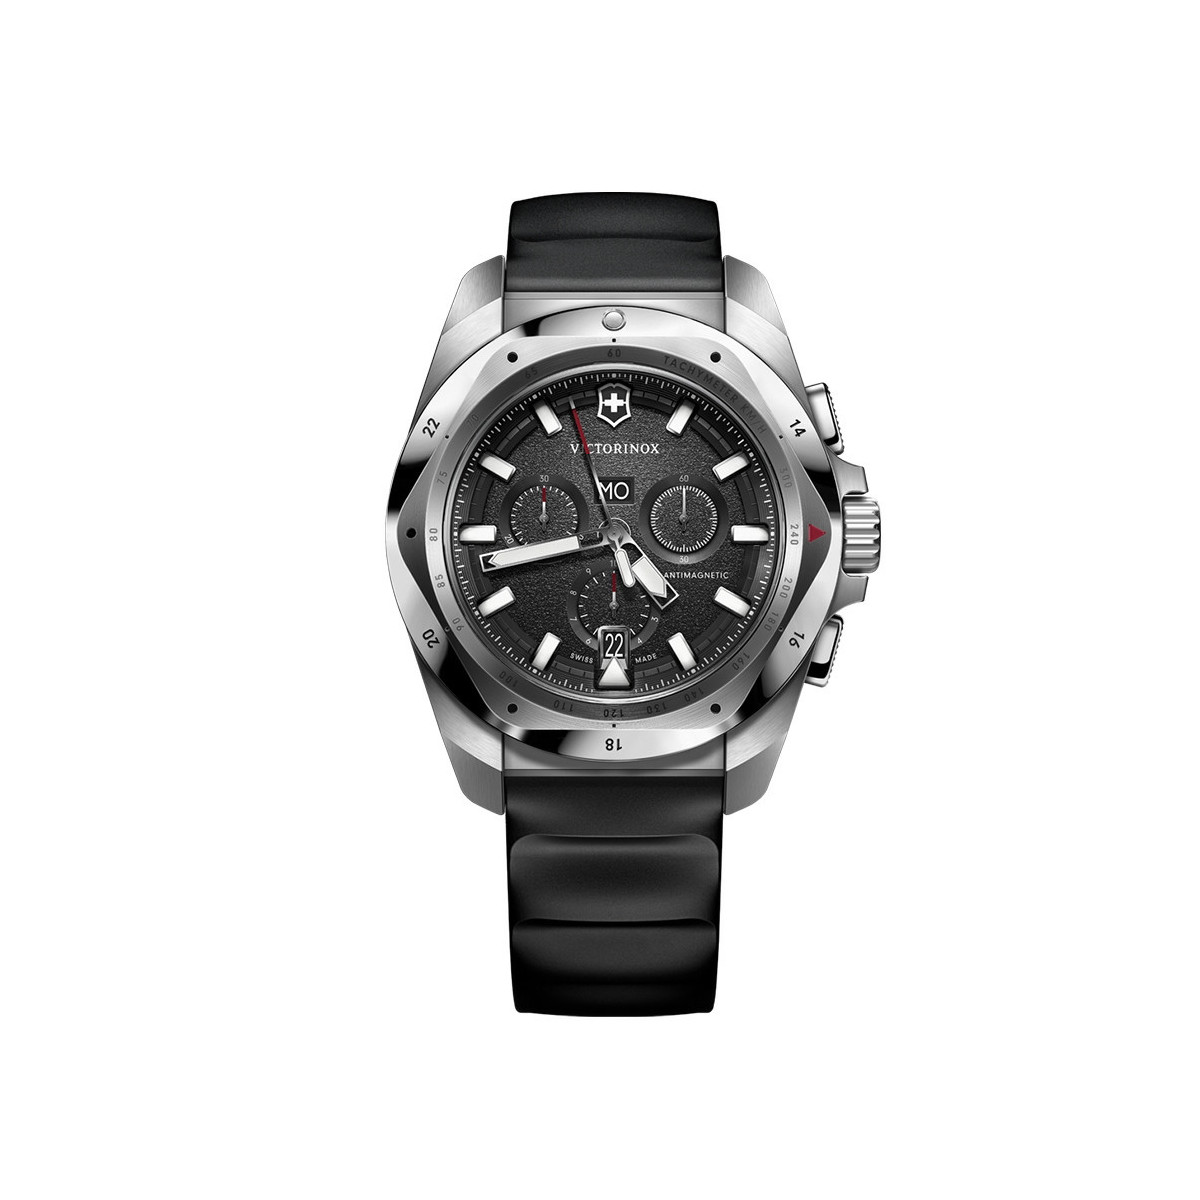 VICTORINOX BLACK STAINLESS STEEL WITH CHRONOGRAPH